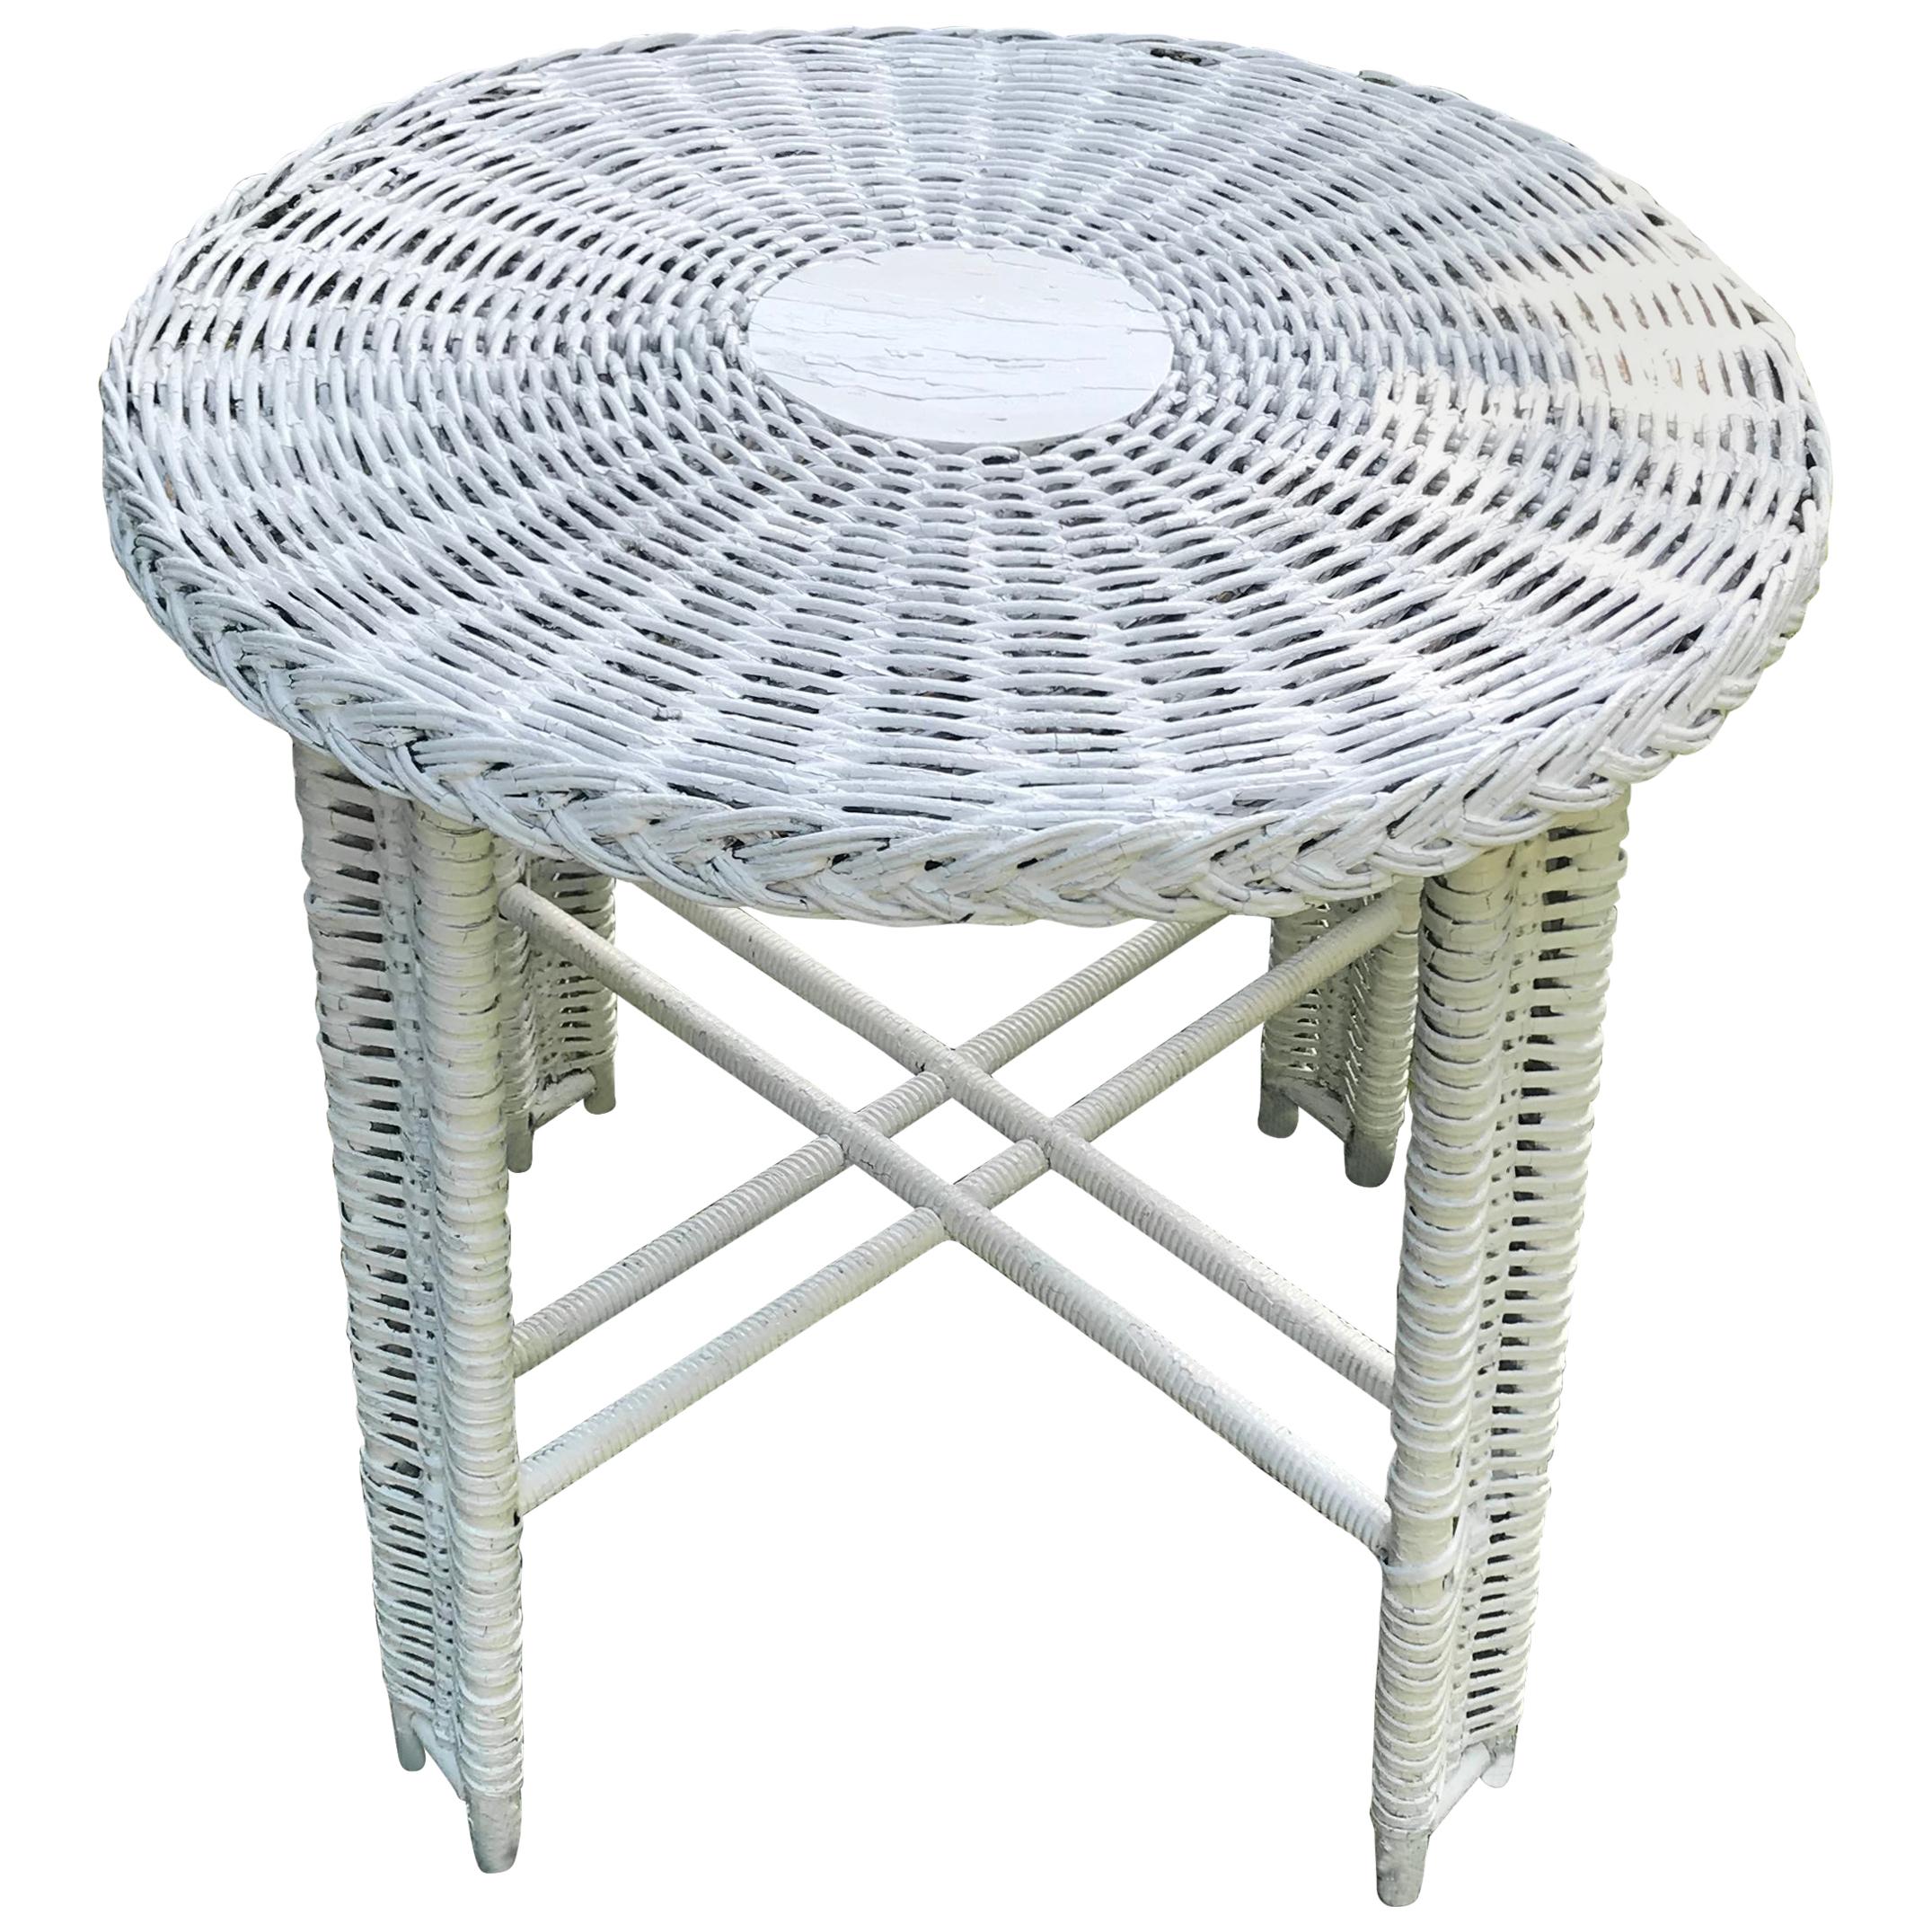 Round White Wicker Table At 1stdibs